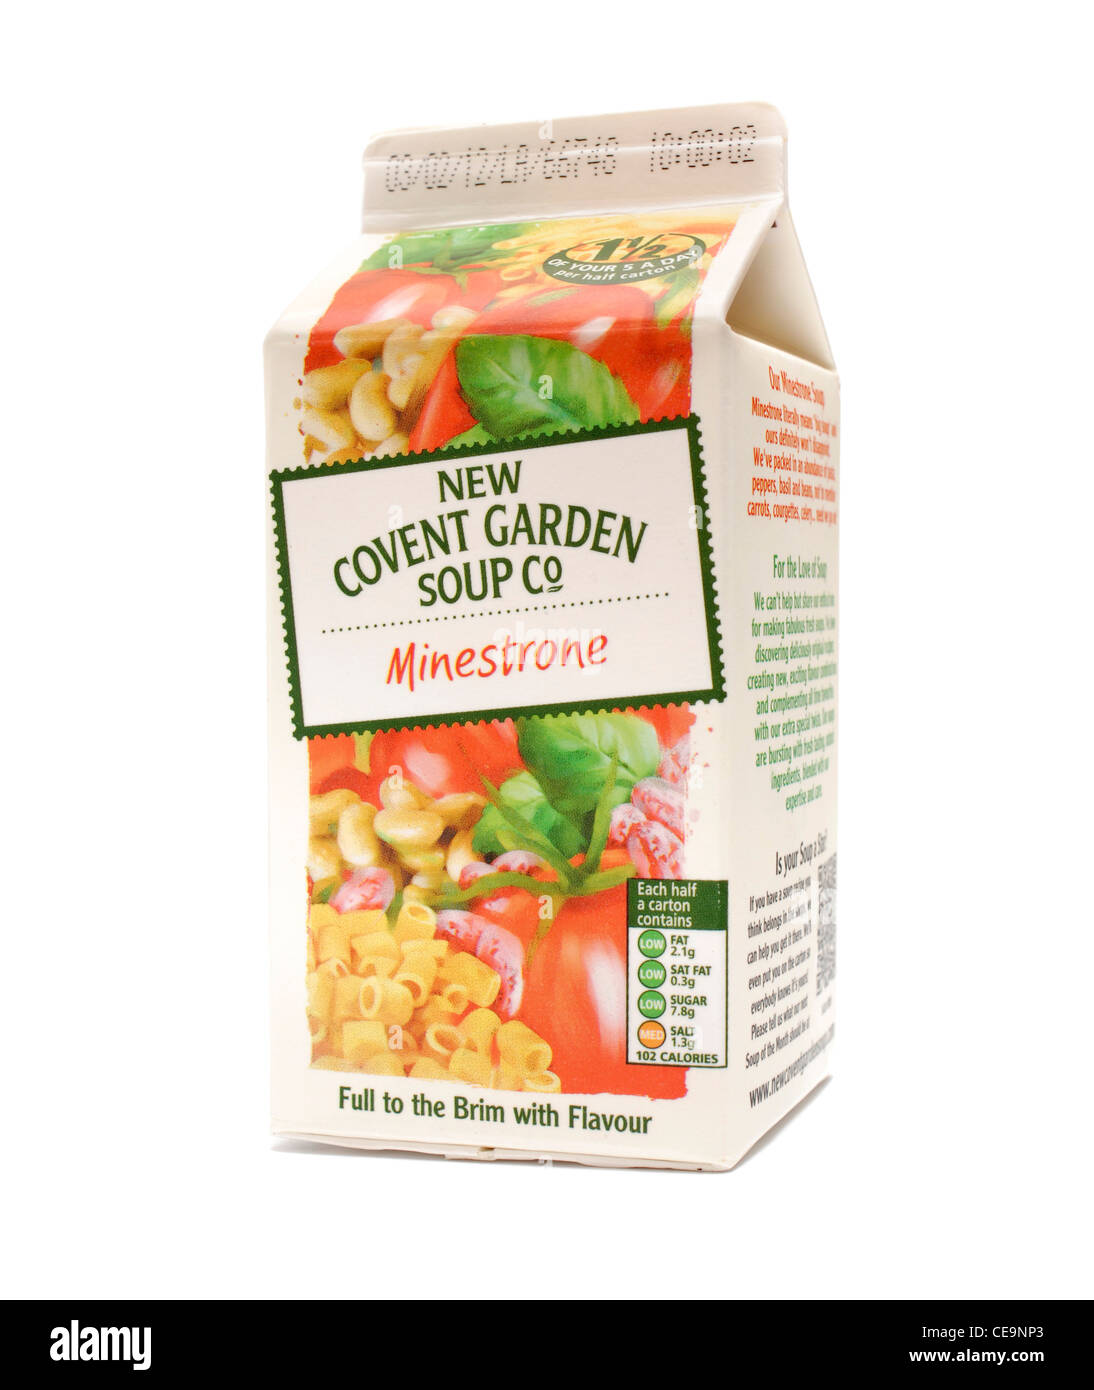 New Covent Garden Soup Co. Minestrone soup Stock Photo